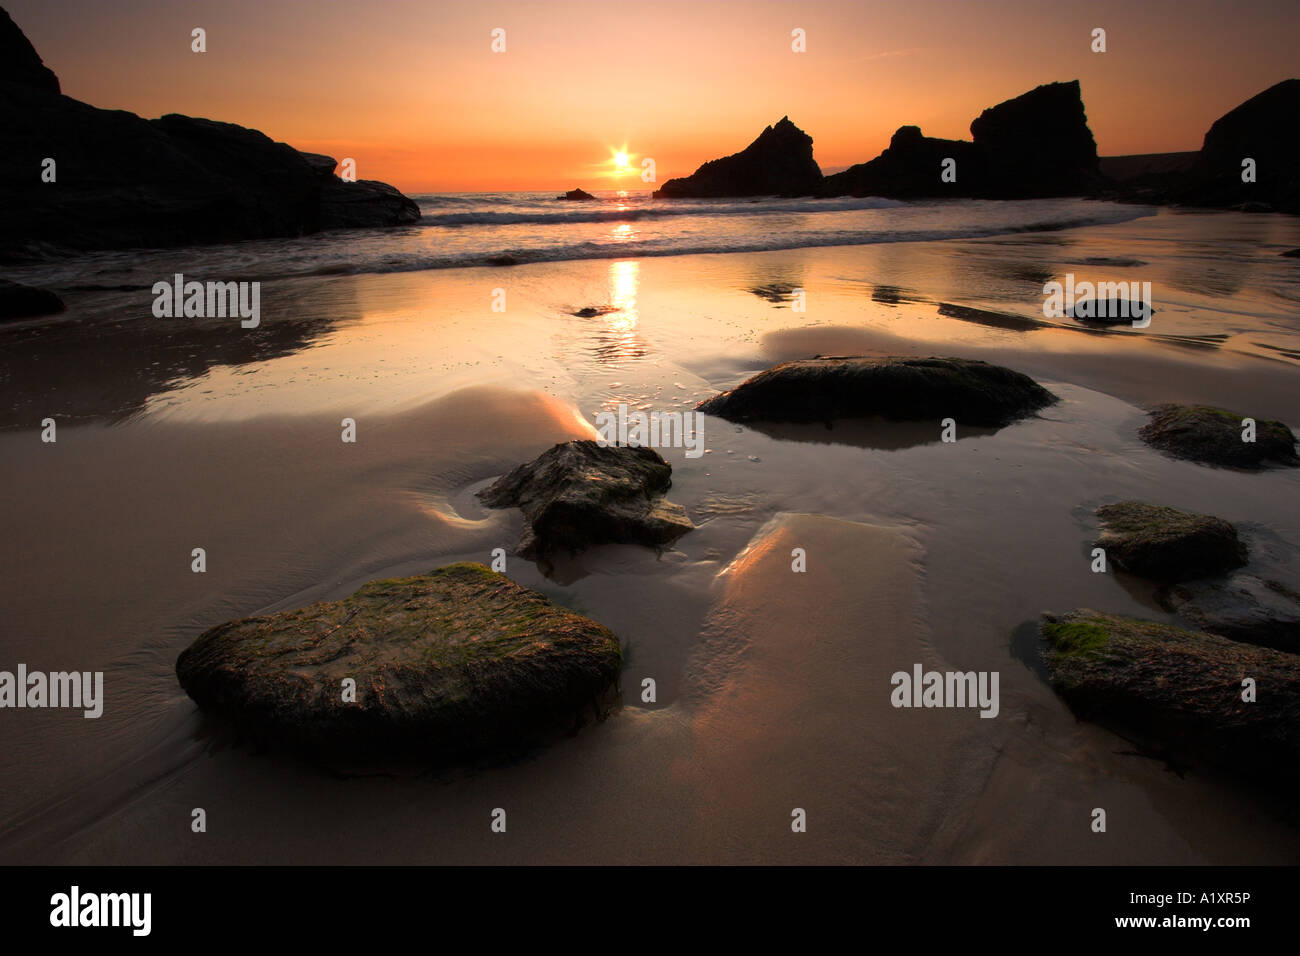 Sunset at the wonderful sandy and rocky shoreline at Bedruthan Steps, Cornwall, England Stock Photo